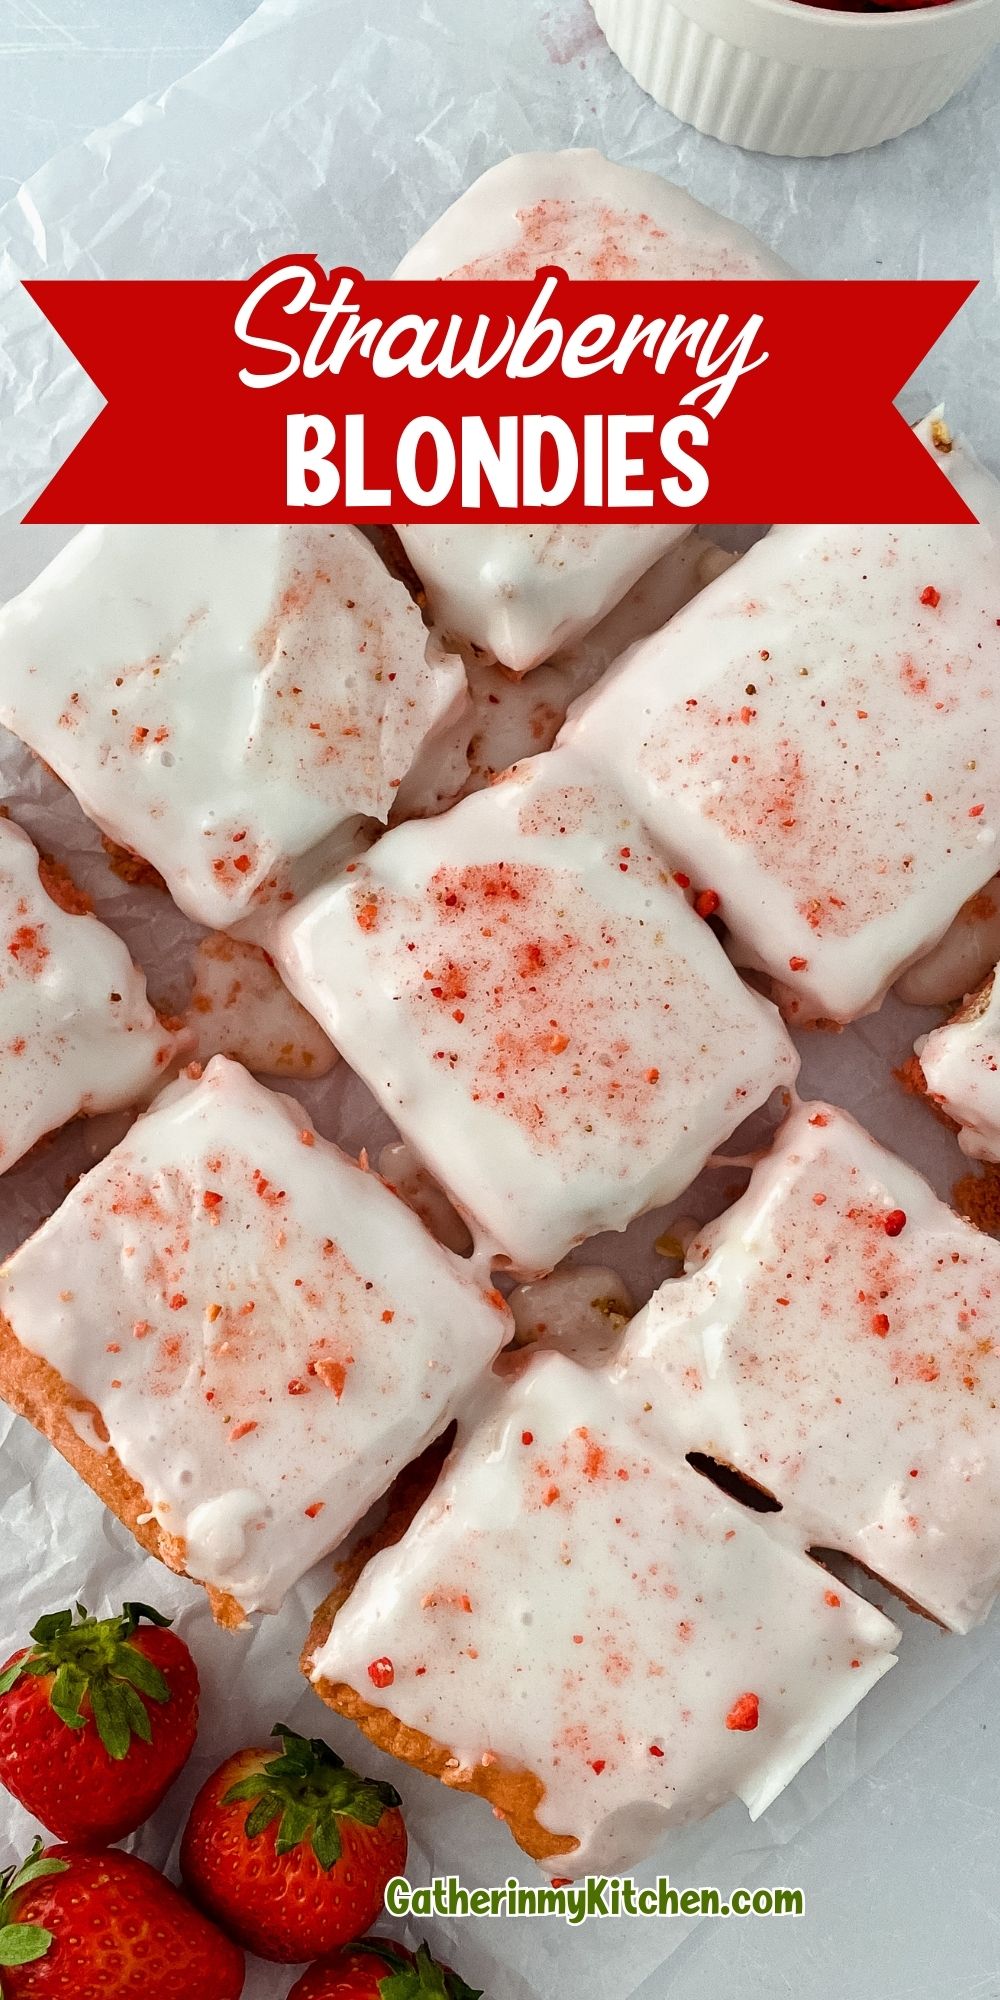 Pin image: cut blondies on parchment paper with the words "Strawberry Blondies" over the top.